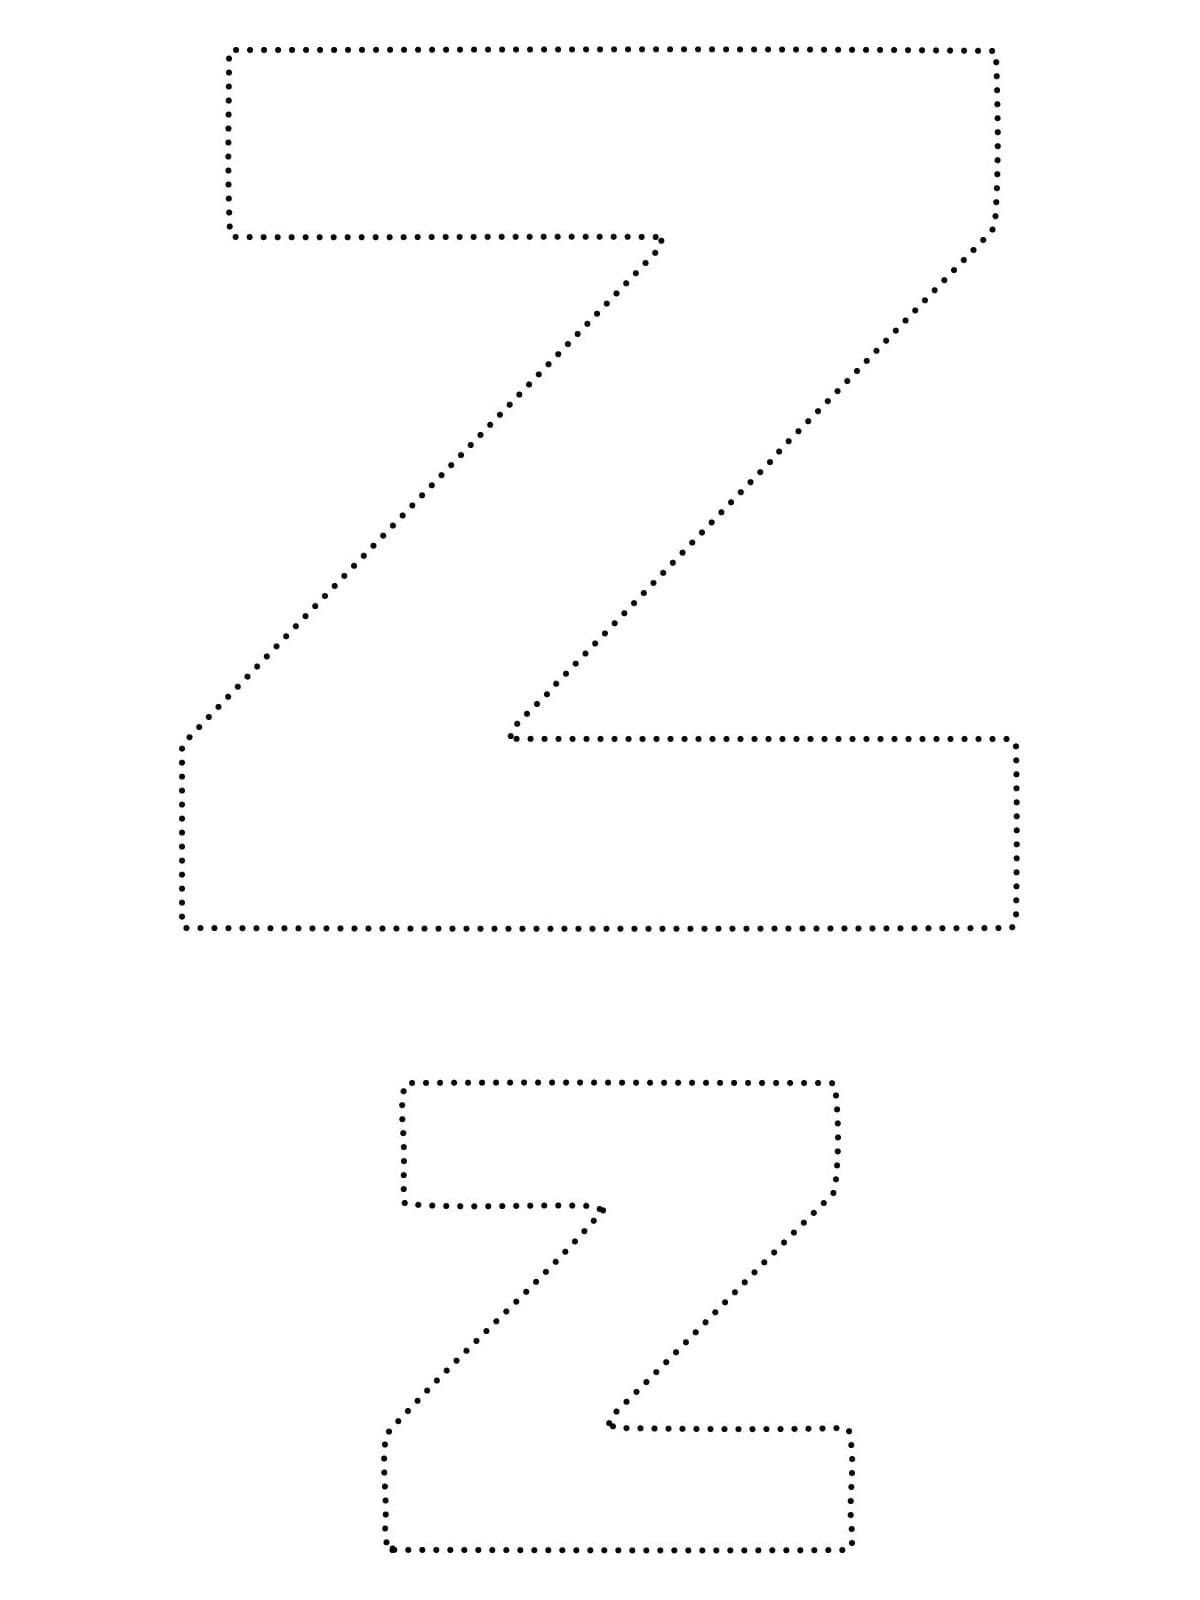 Simple Letter Z Tracing coloring page - Download, Print or Color Online ...